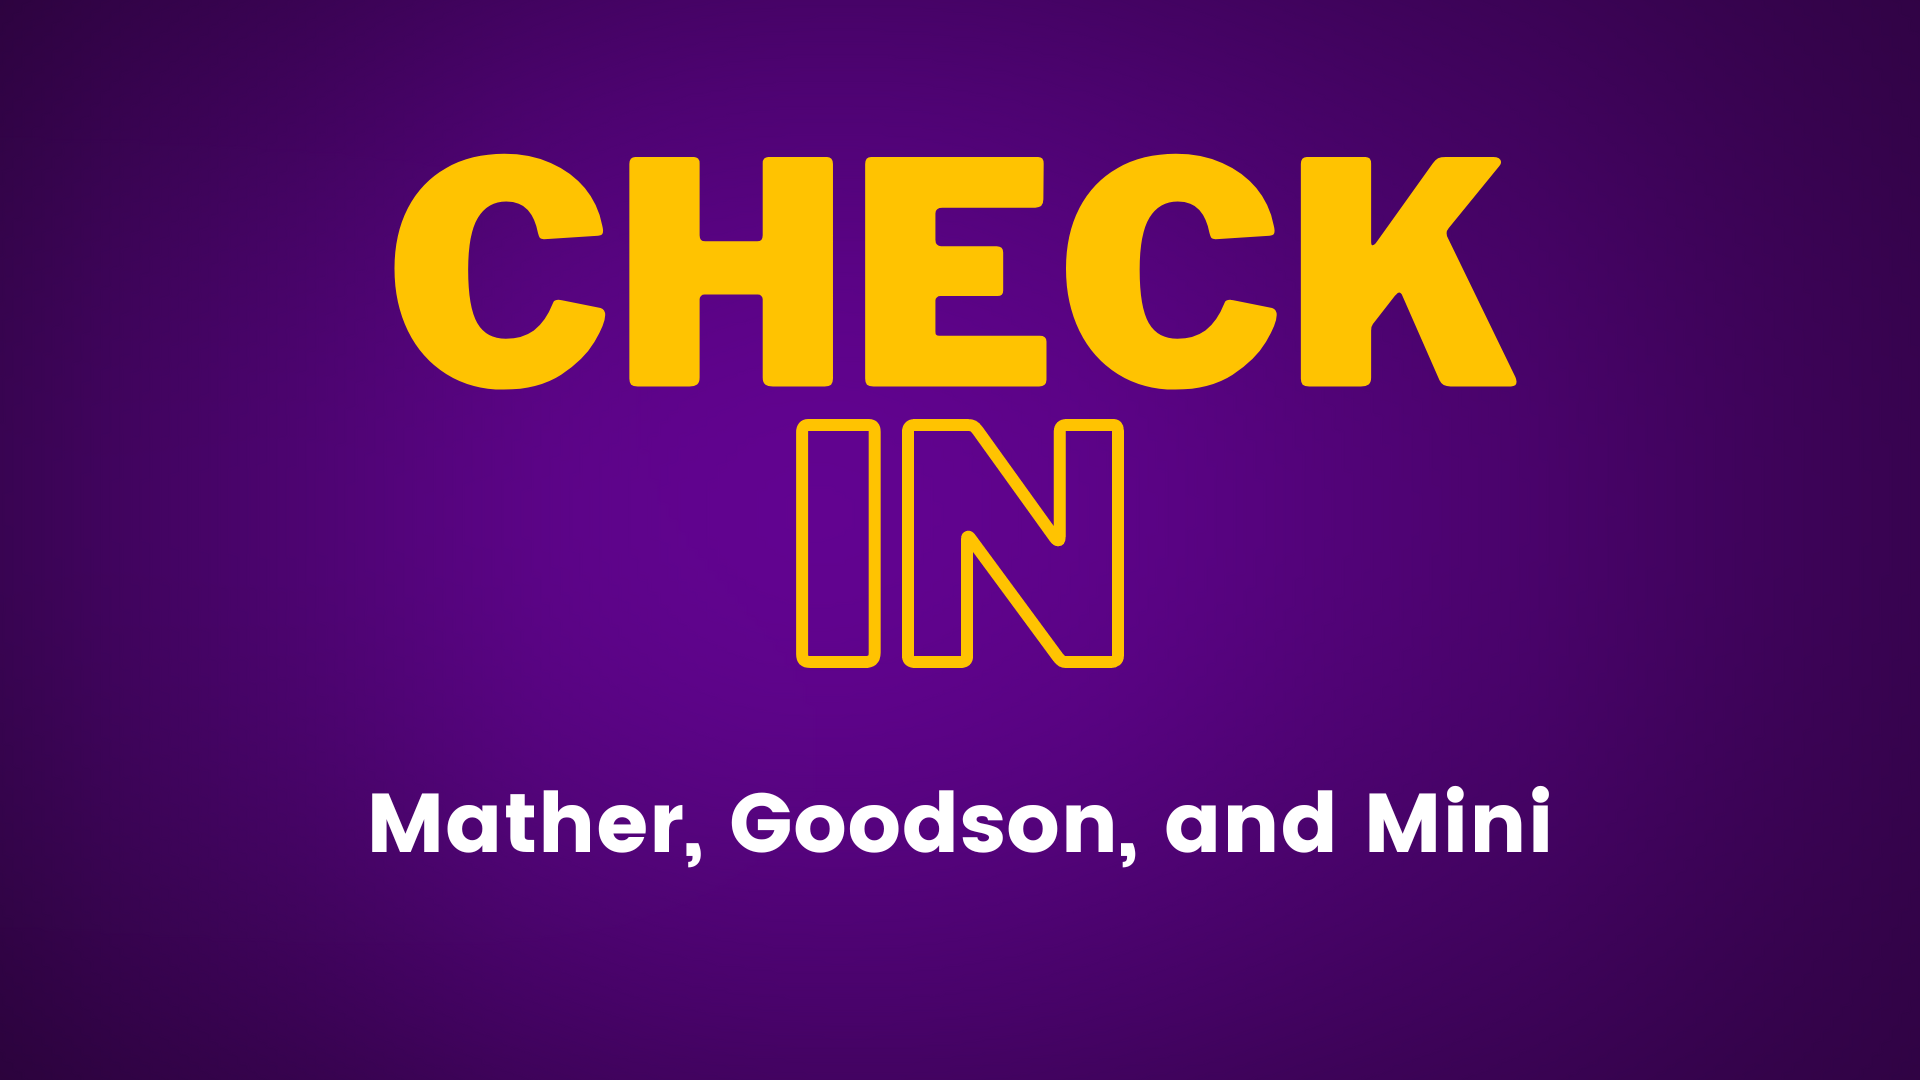 Check in Mather Goodson Mini